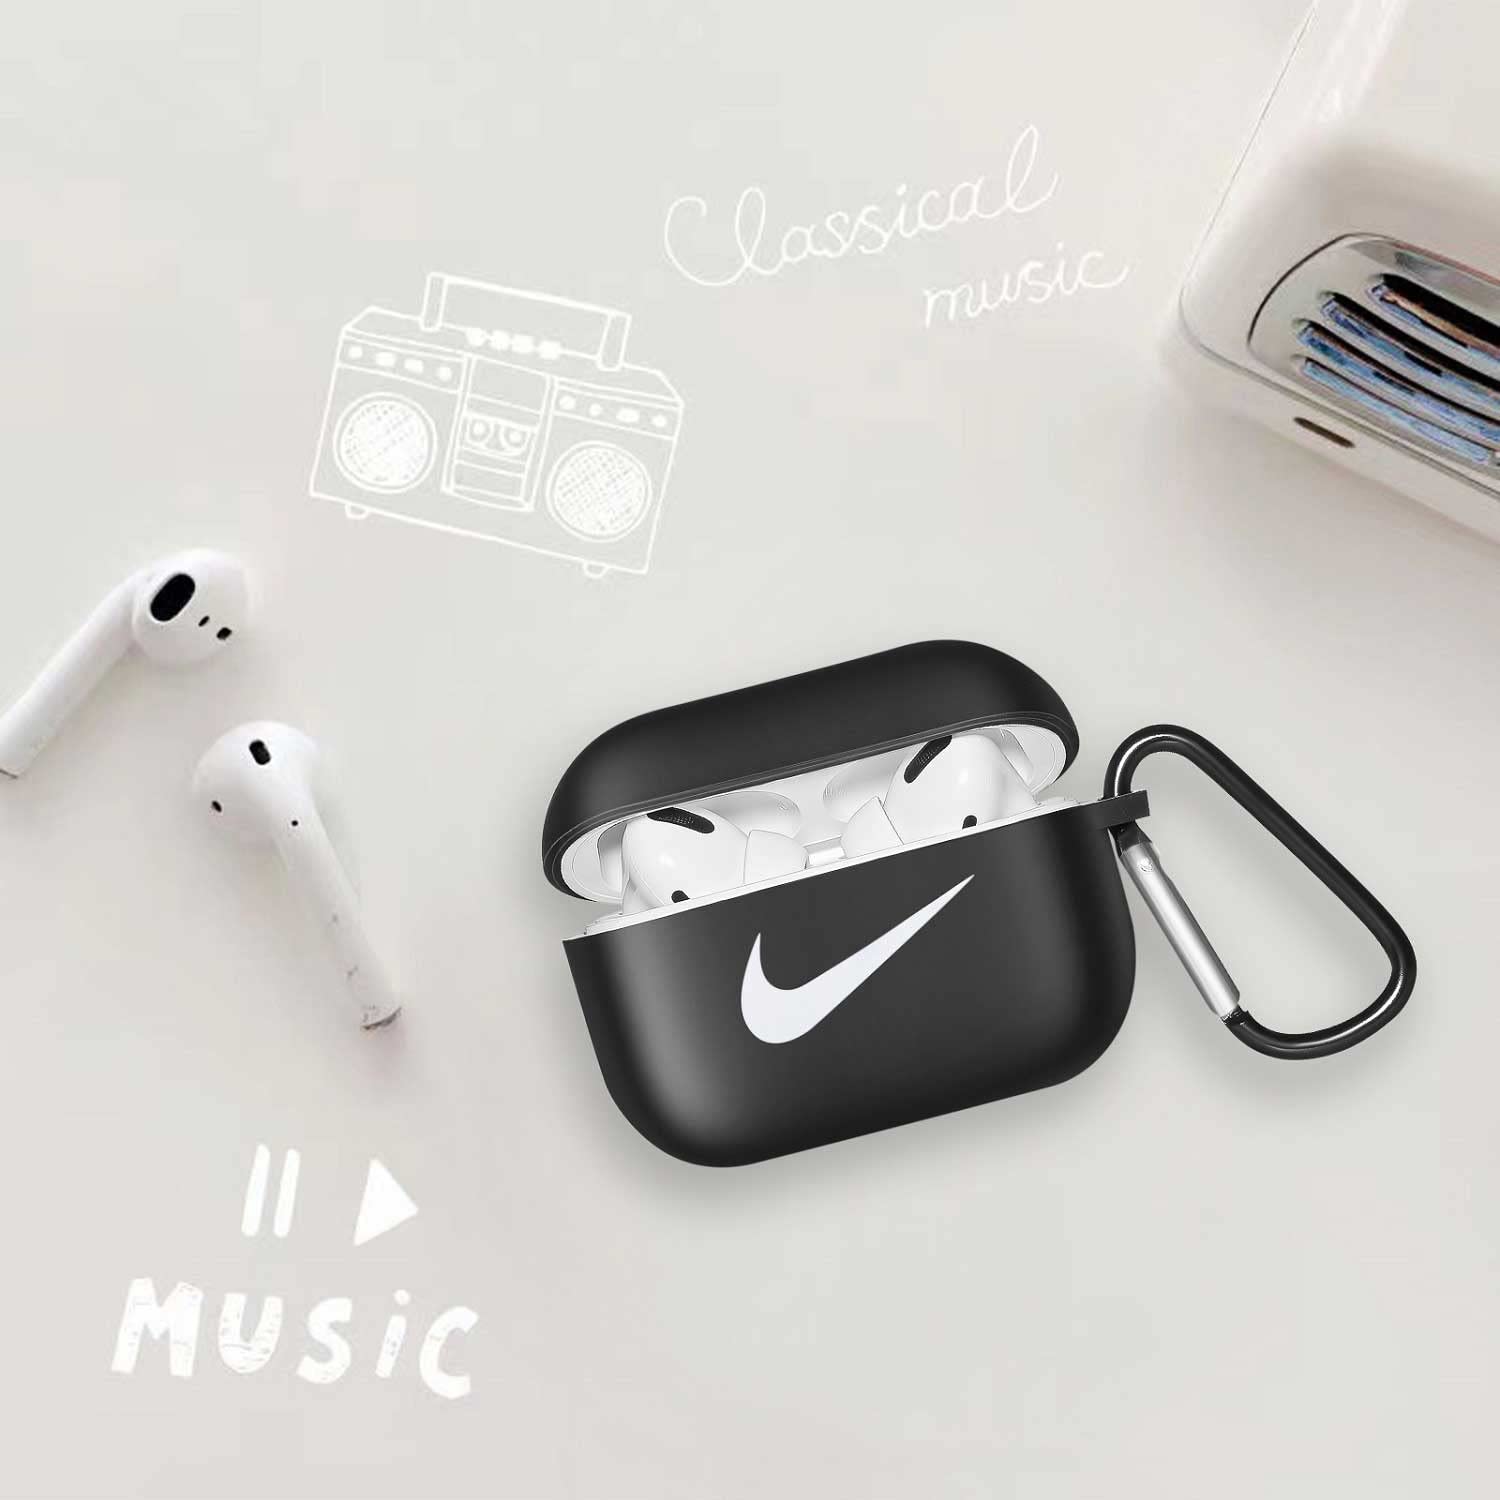 Compatible with AirPod Pro Case, Full-Body Soft Silicone Shell Protective Case Cover with Keychain for AirPods Pro, Black